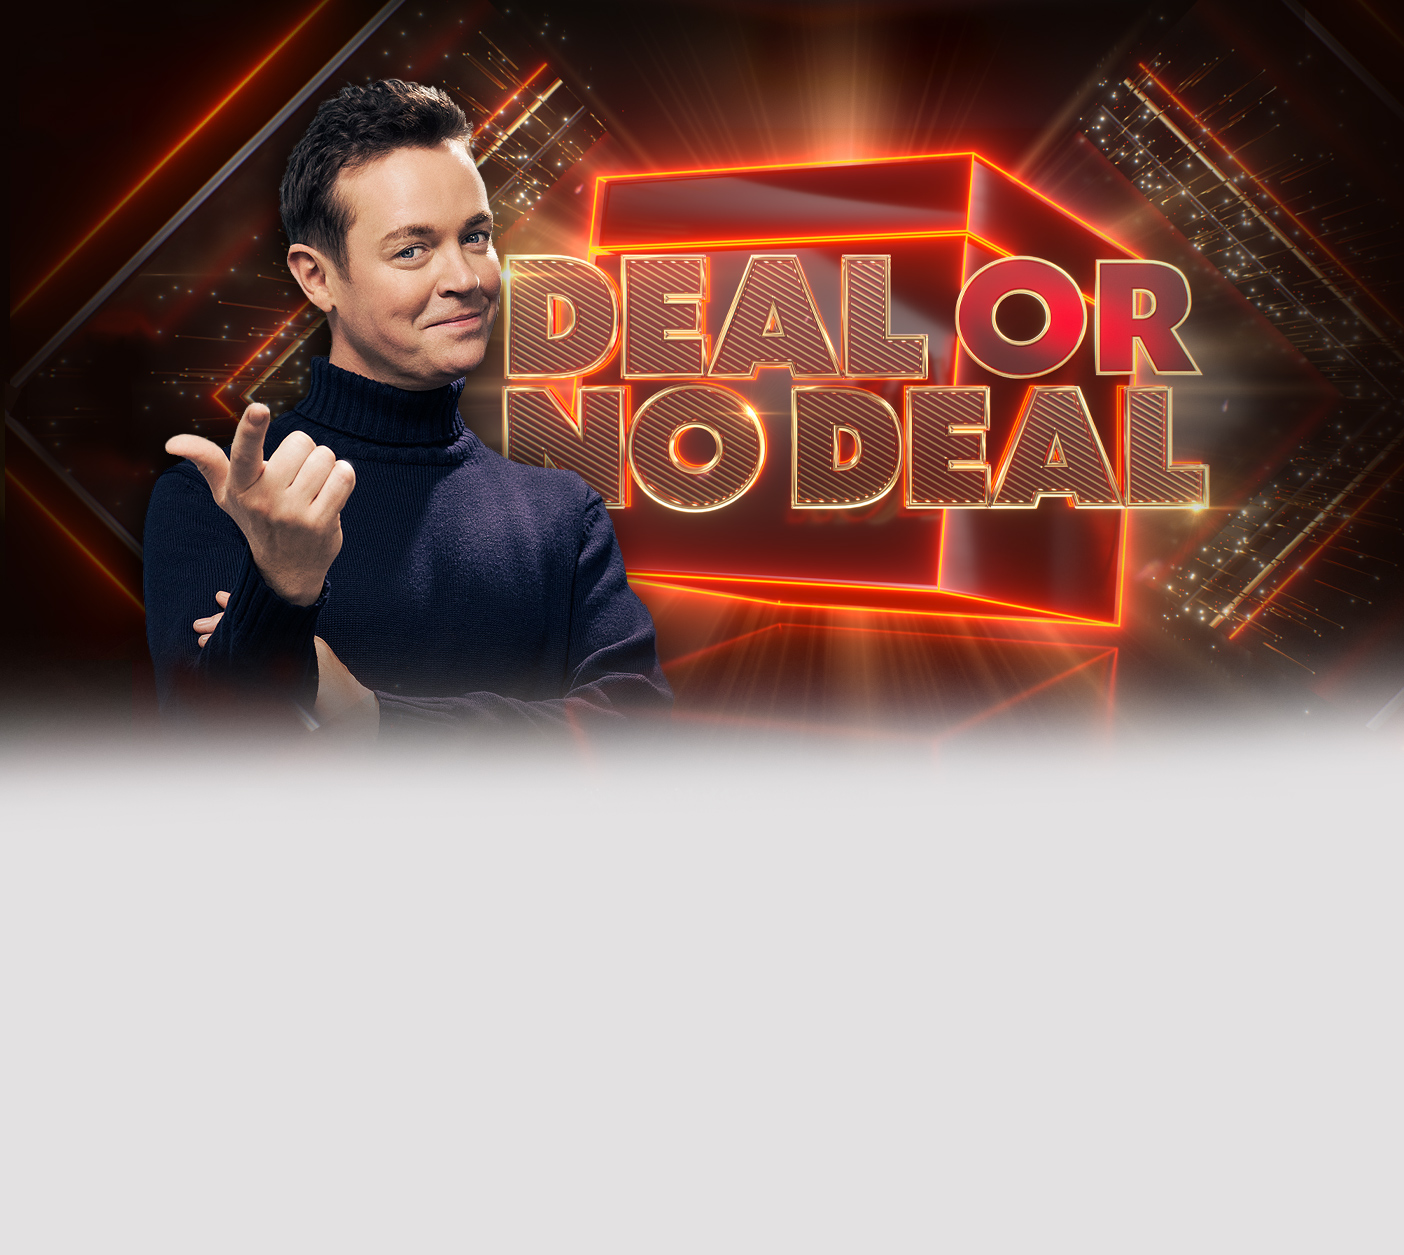 Book Tickets For Deal Or No Deal Applausestore